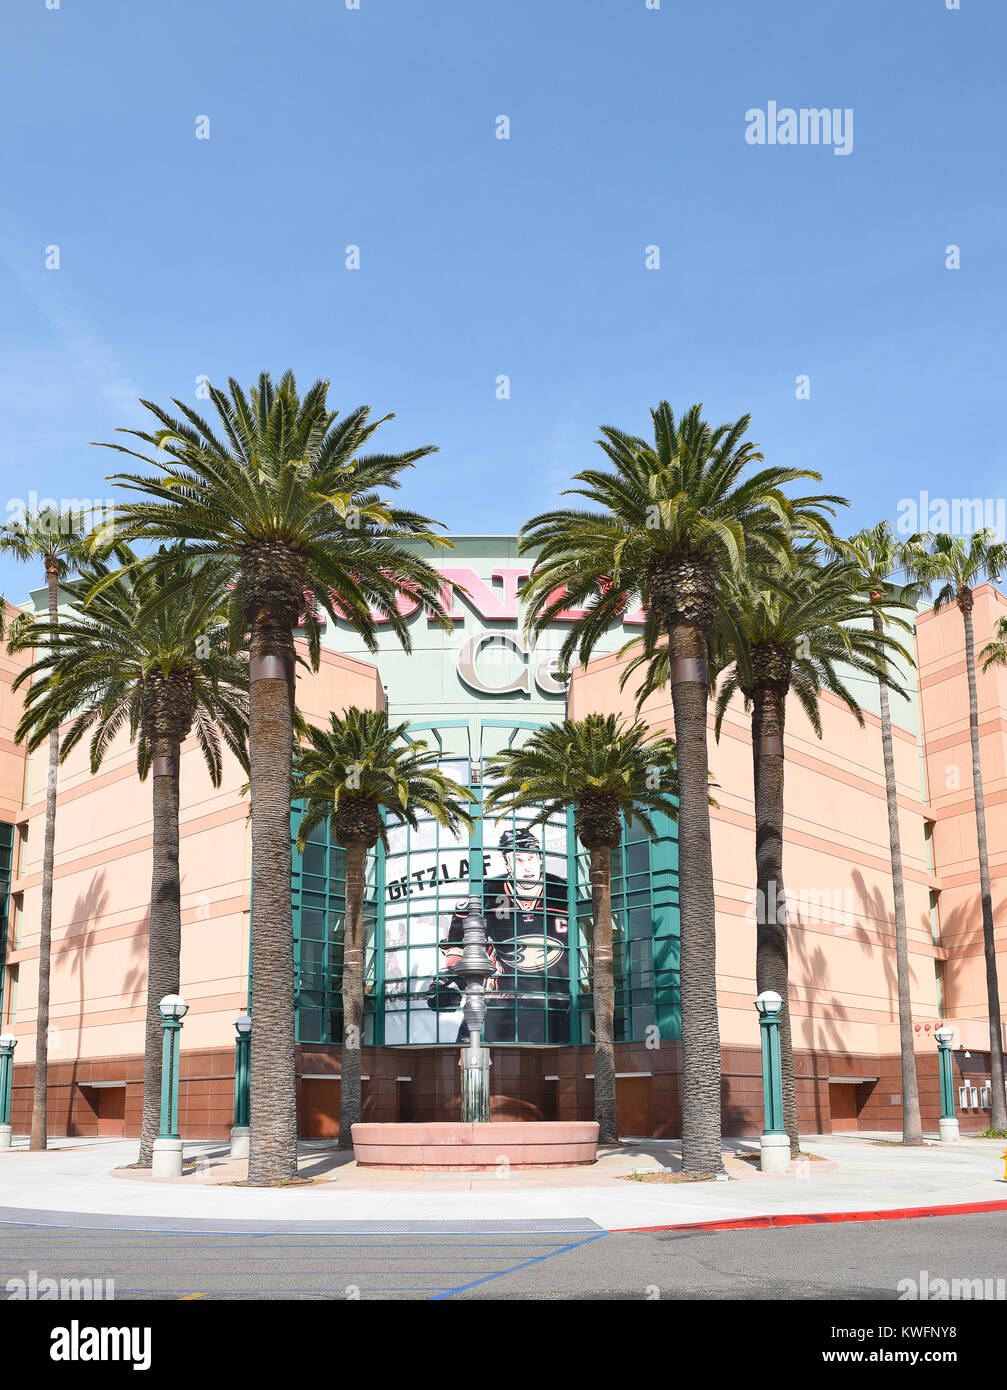 The Honda Center in Anaheim, California. The arena is home to the Anaheim Ducks of the National Hockey League and the Los Angeles Kiss of the Arena Fo Stock Photo